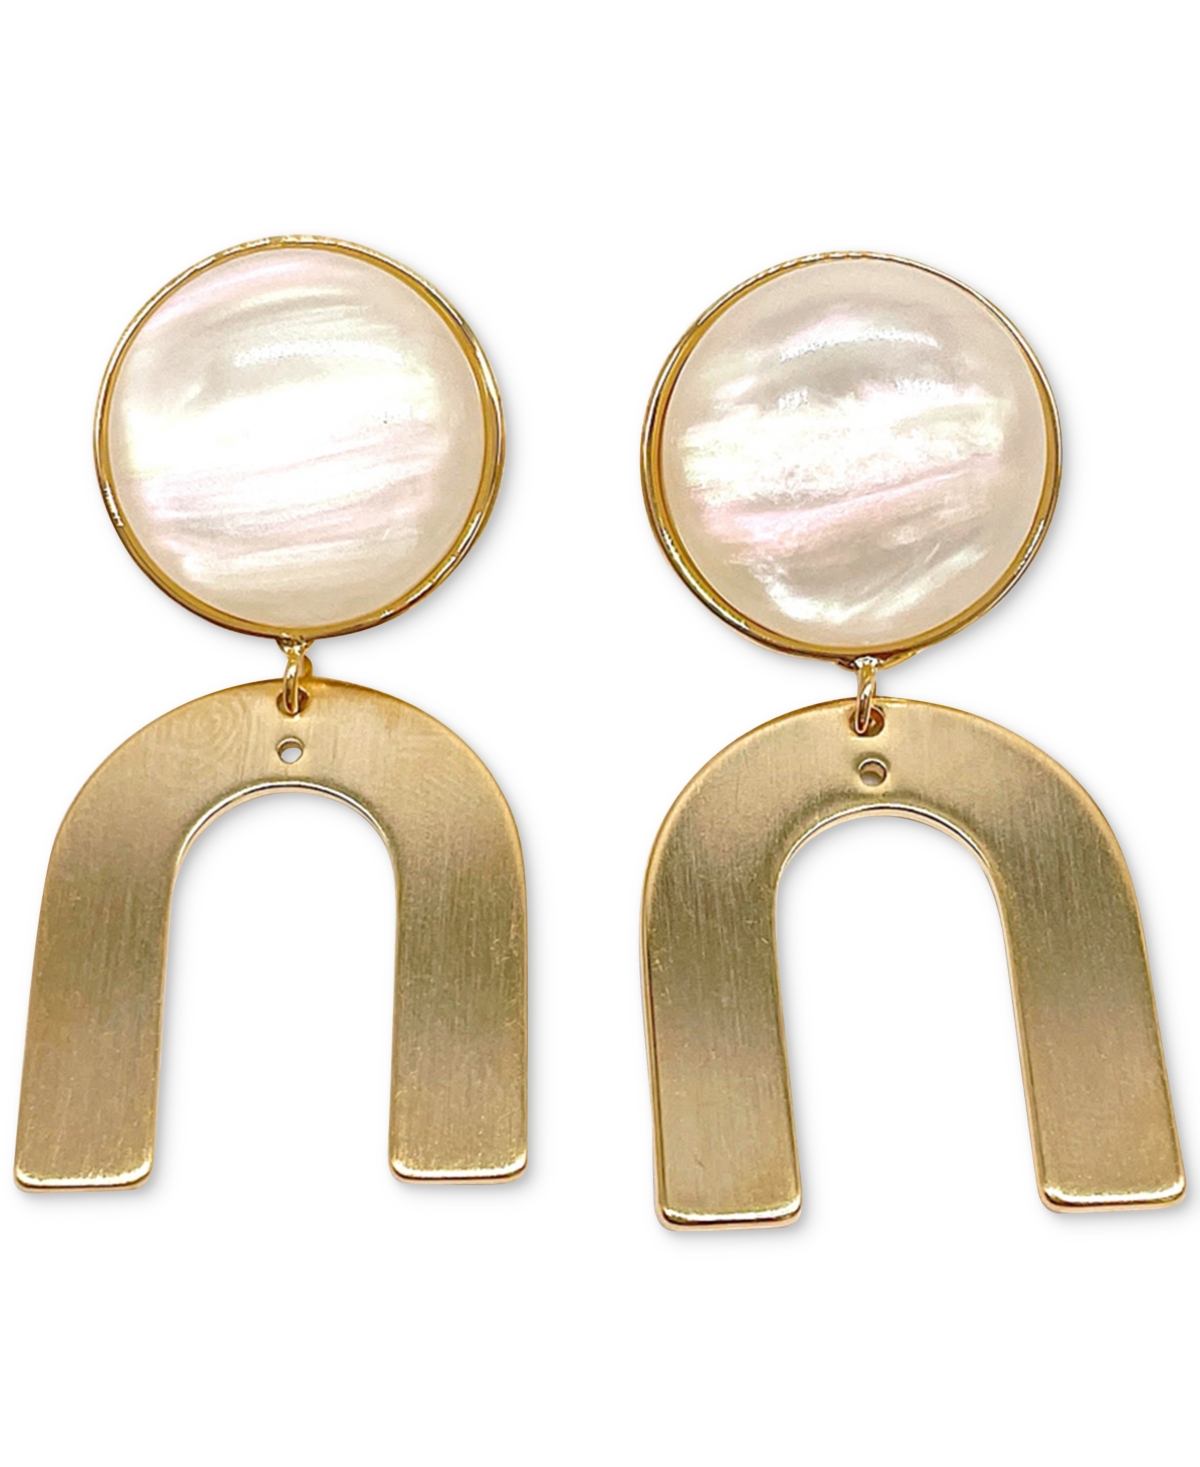 14k Gold-Plated Imitation Mother of Pearl Drop Earrings - Gold